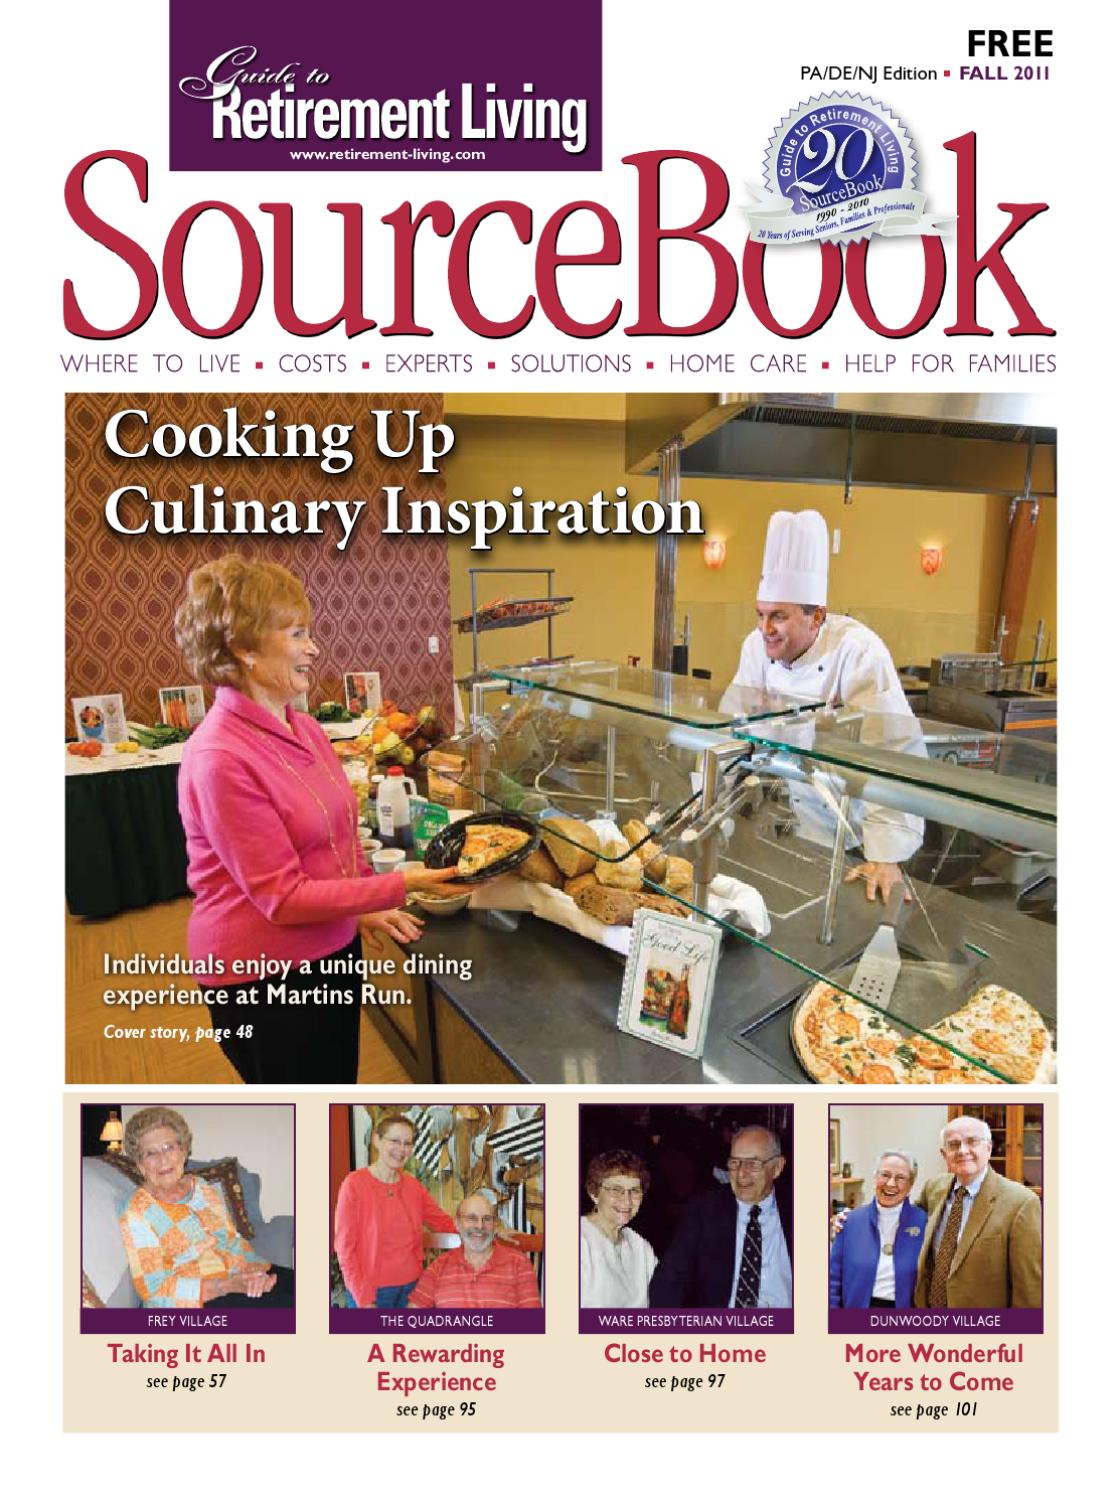 Fireplace Plus Manahawkin Lovely Pa Fall 11 by sourcebook issuu